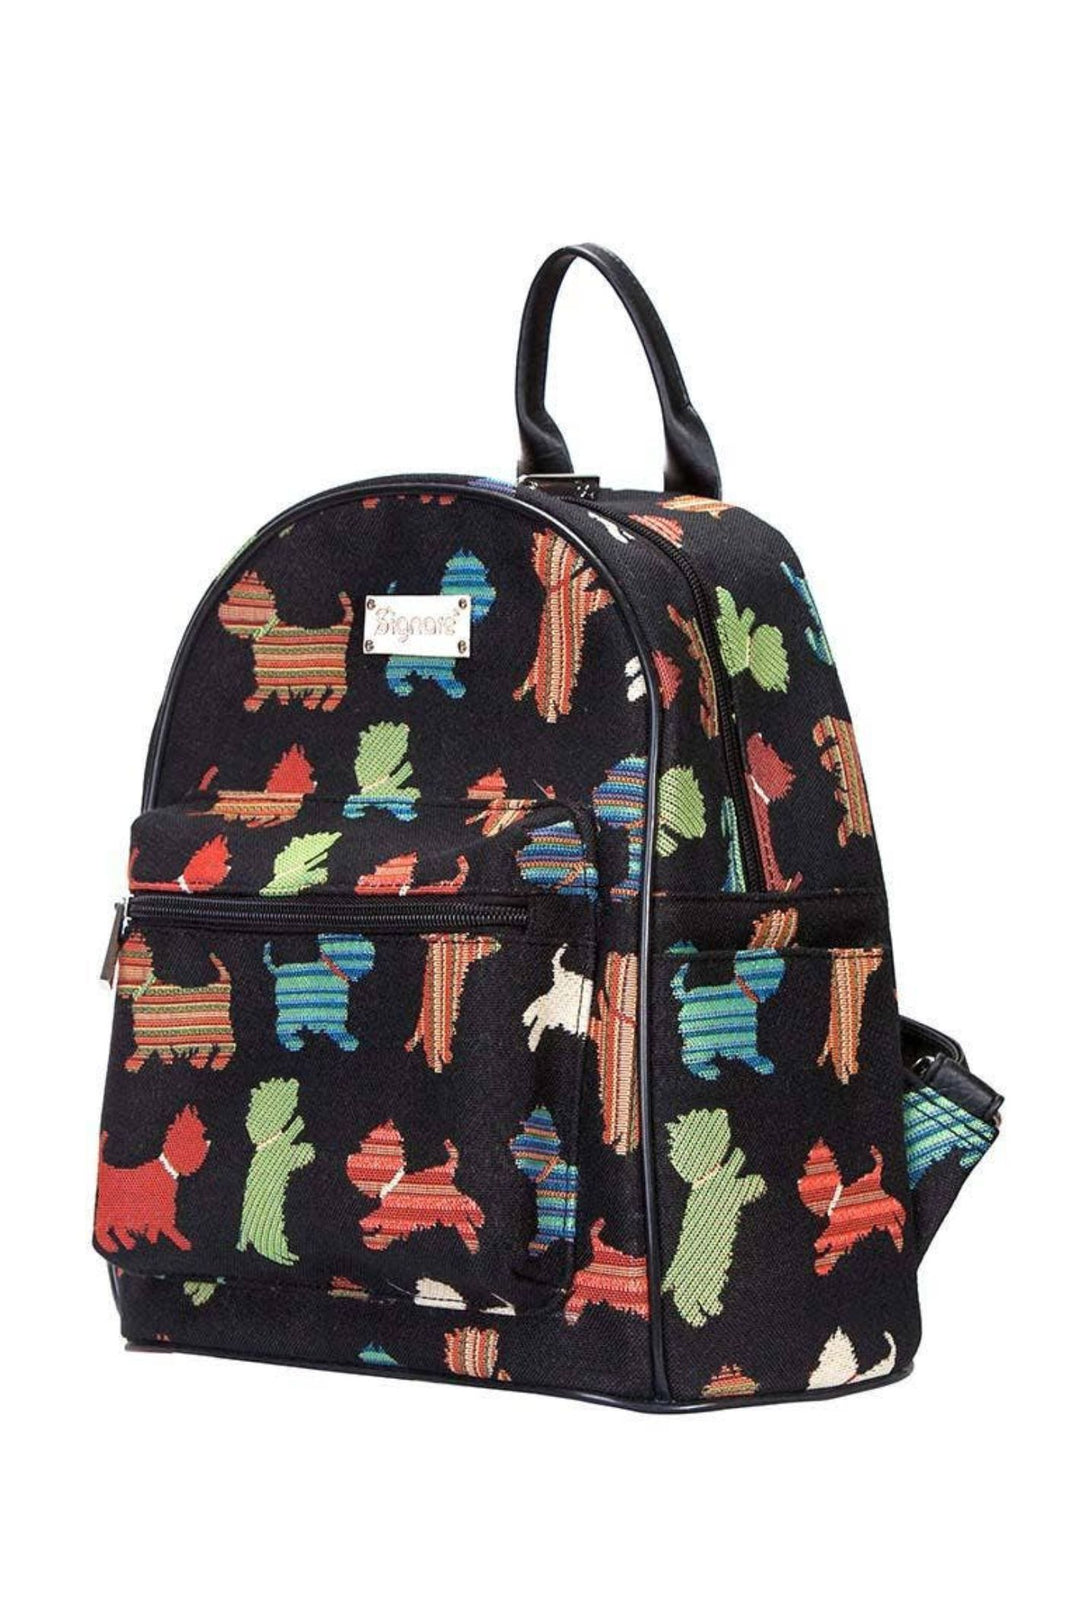 Multi-coloured Playful Puppy Daypack